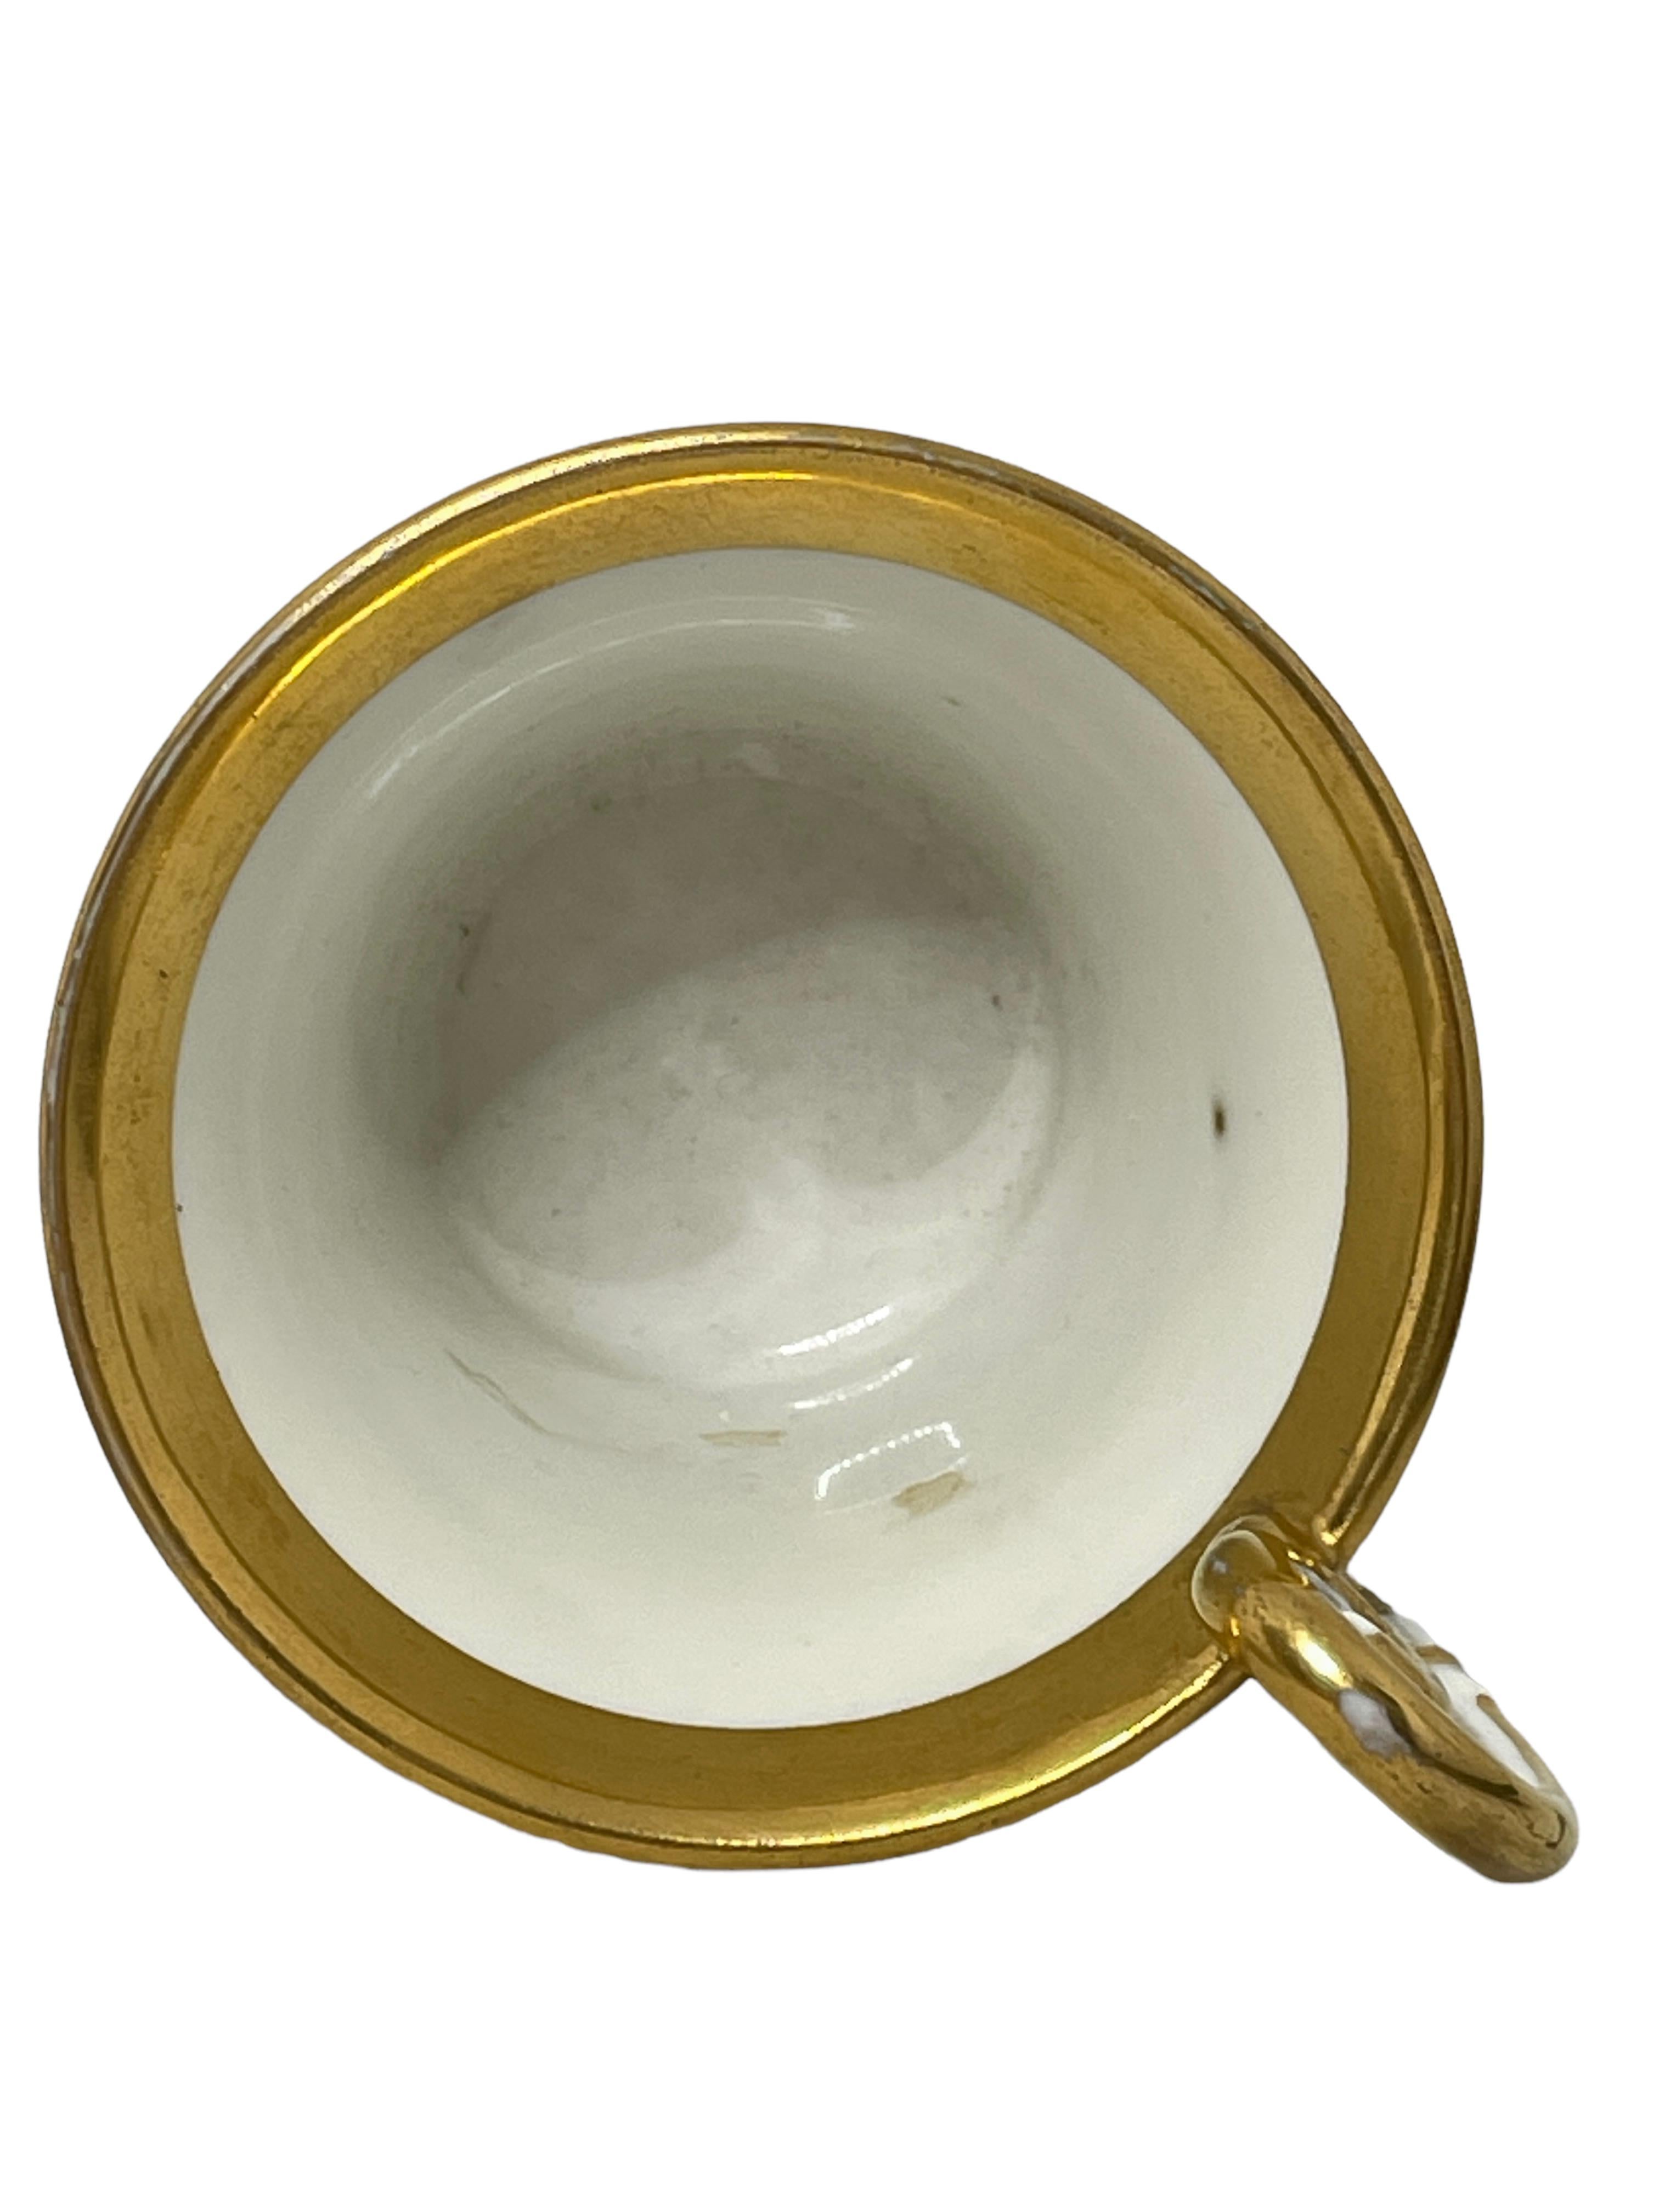 19th Century Biedermeier Period Topographical Porcelain Cup and Saucer For Sale 2